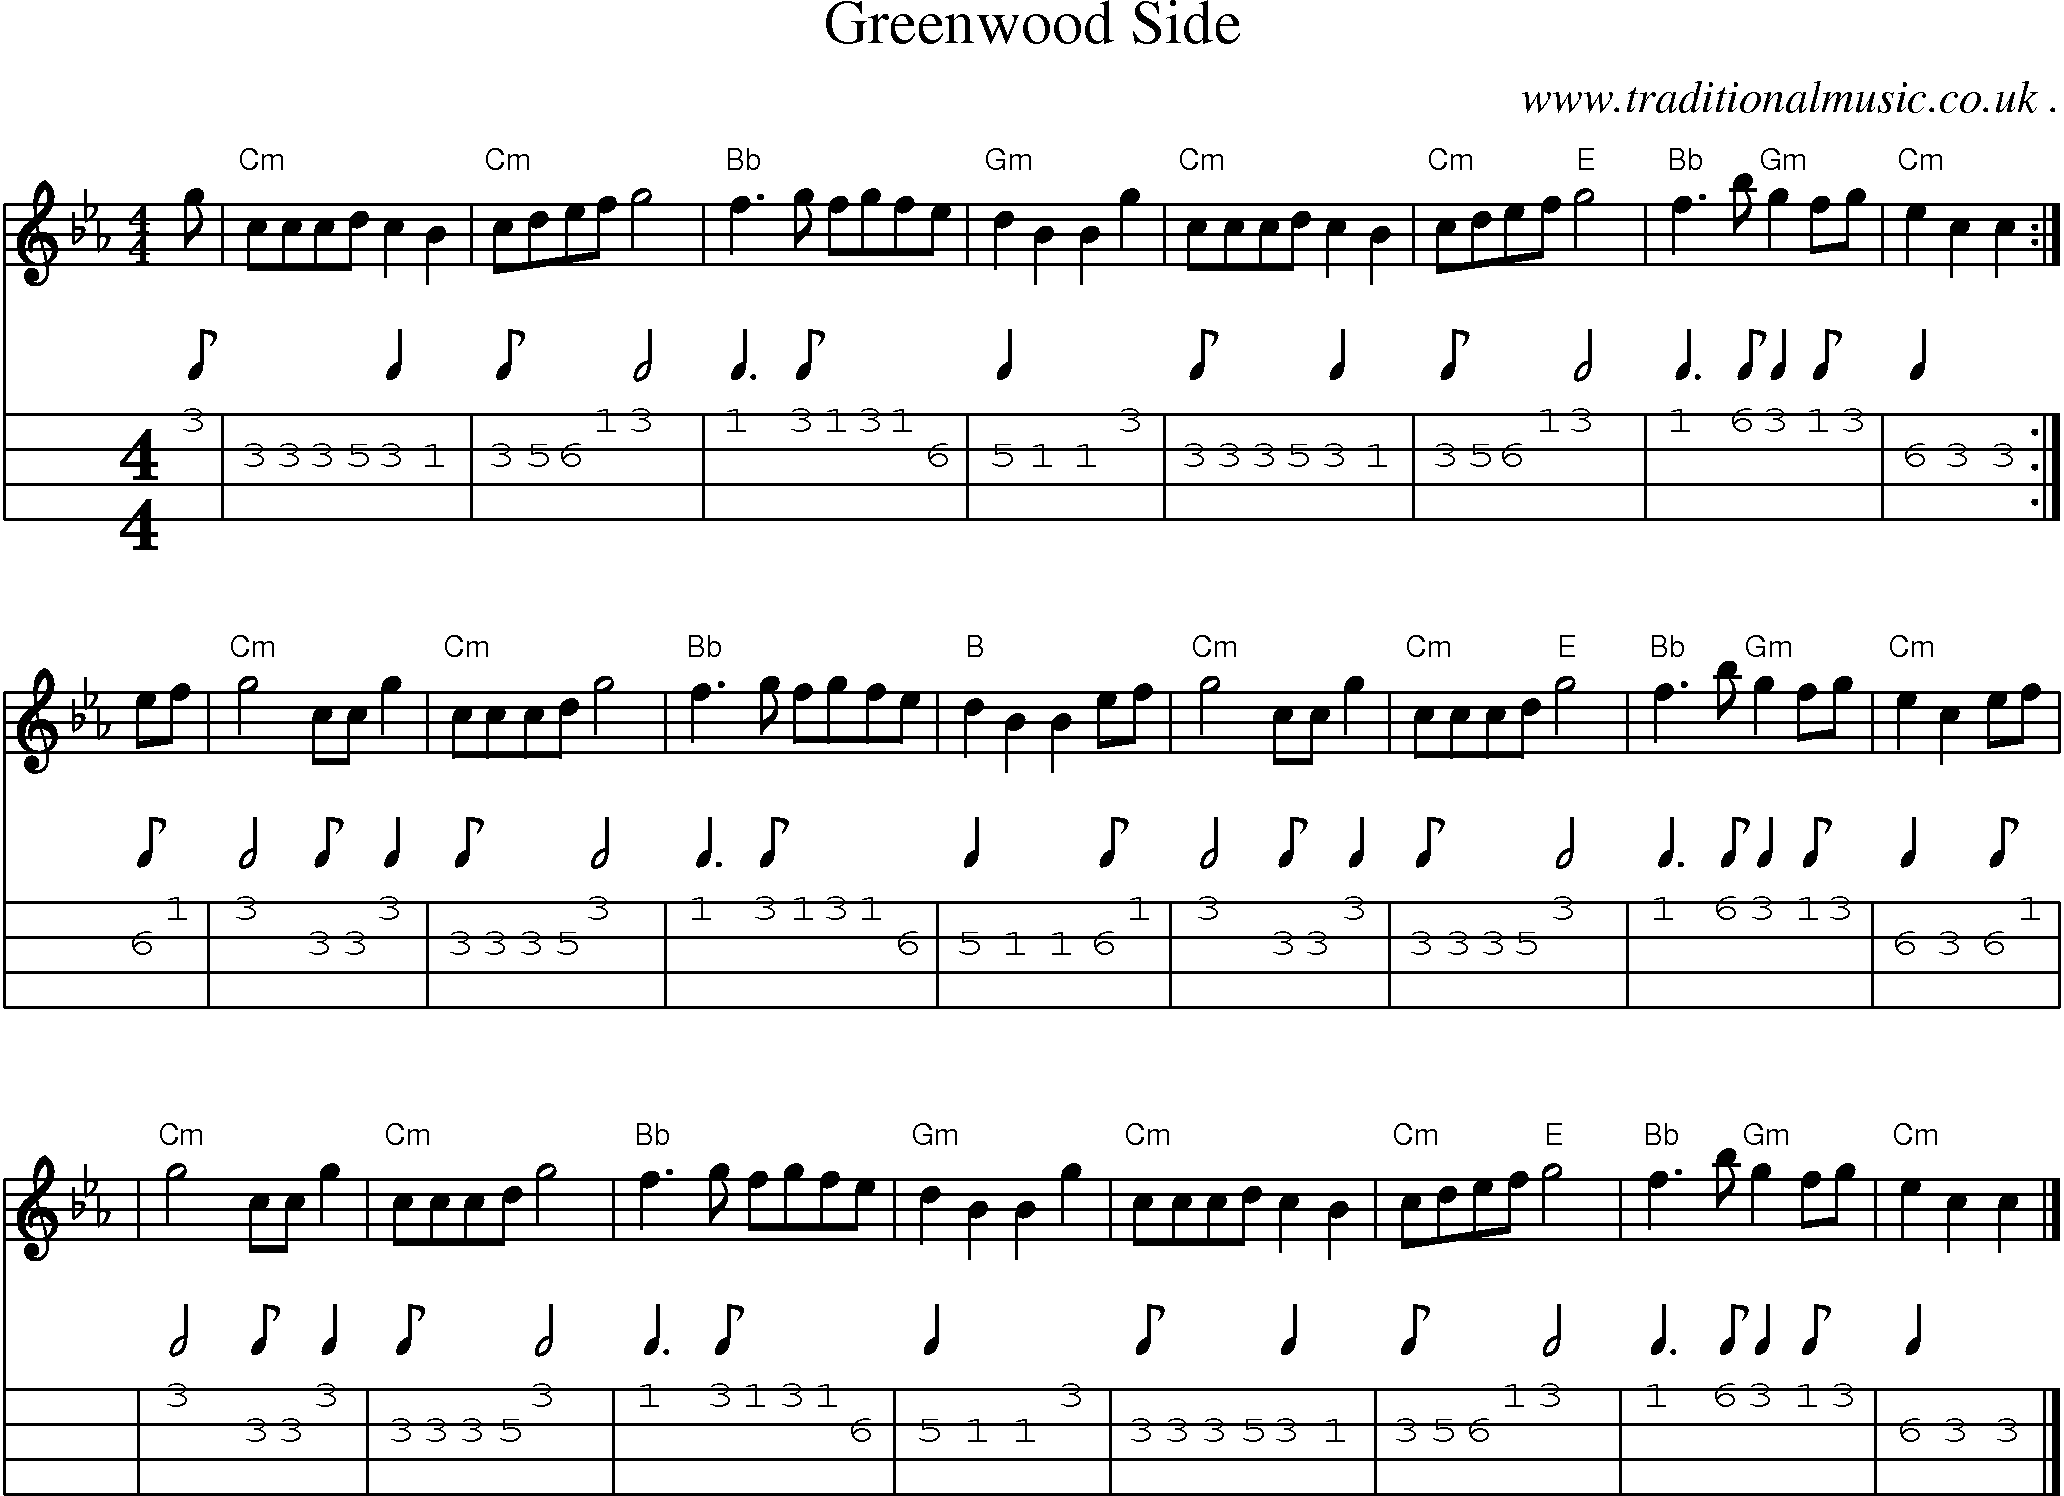 Sheet-music  score, Chords and Mandolin Tabs for Greenwood Side